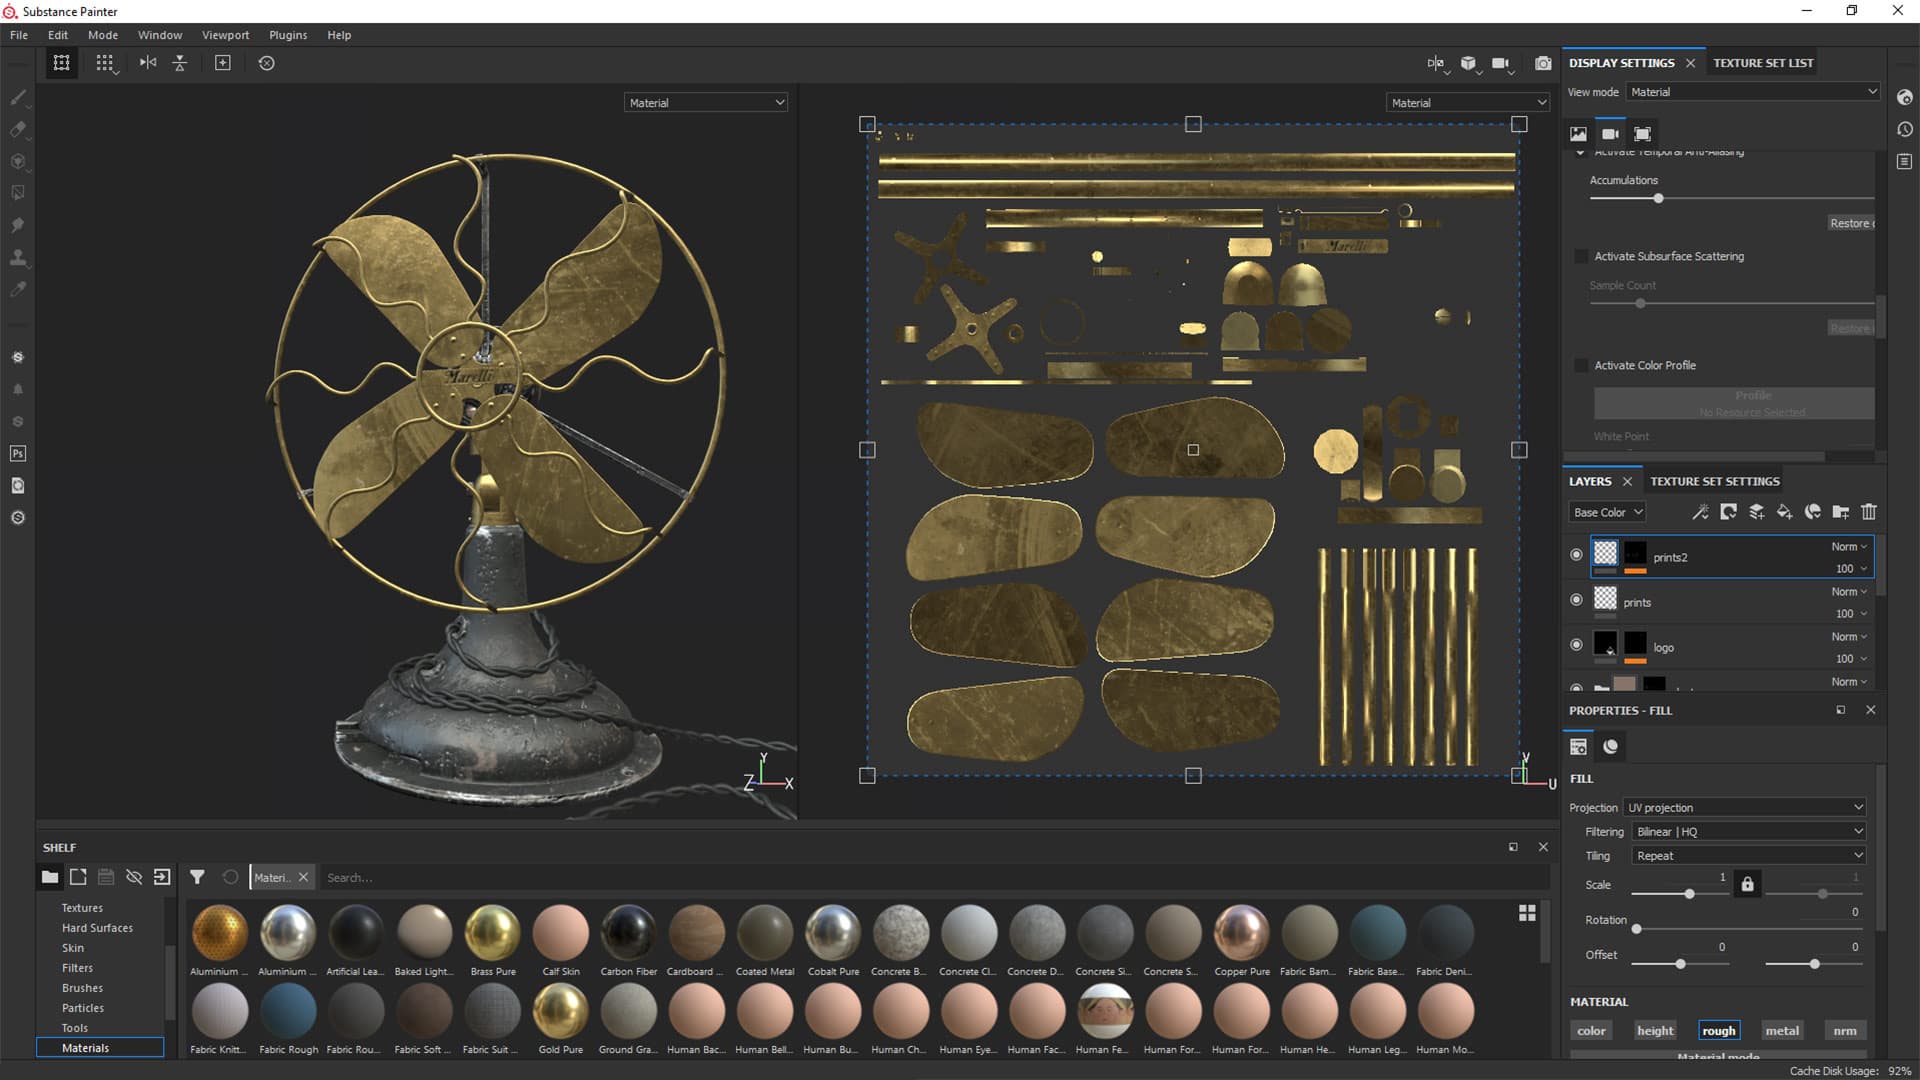 download the new version for ios Adobe Substance Painter 2023 v9.0.0.2585